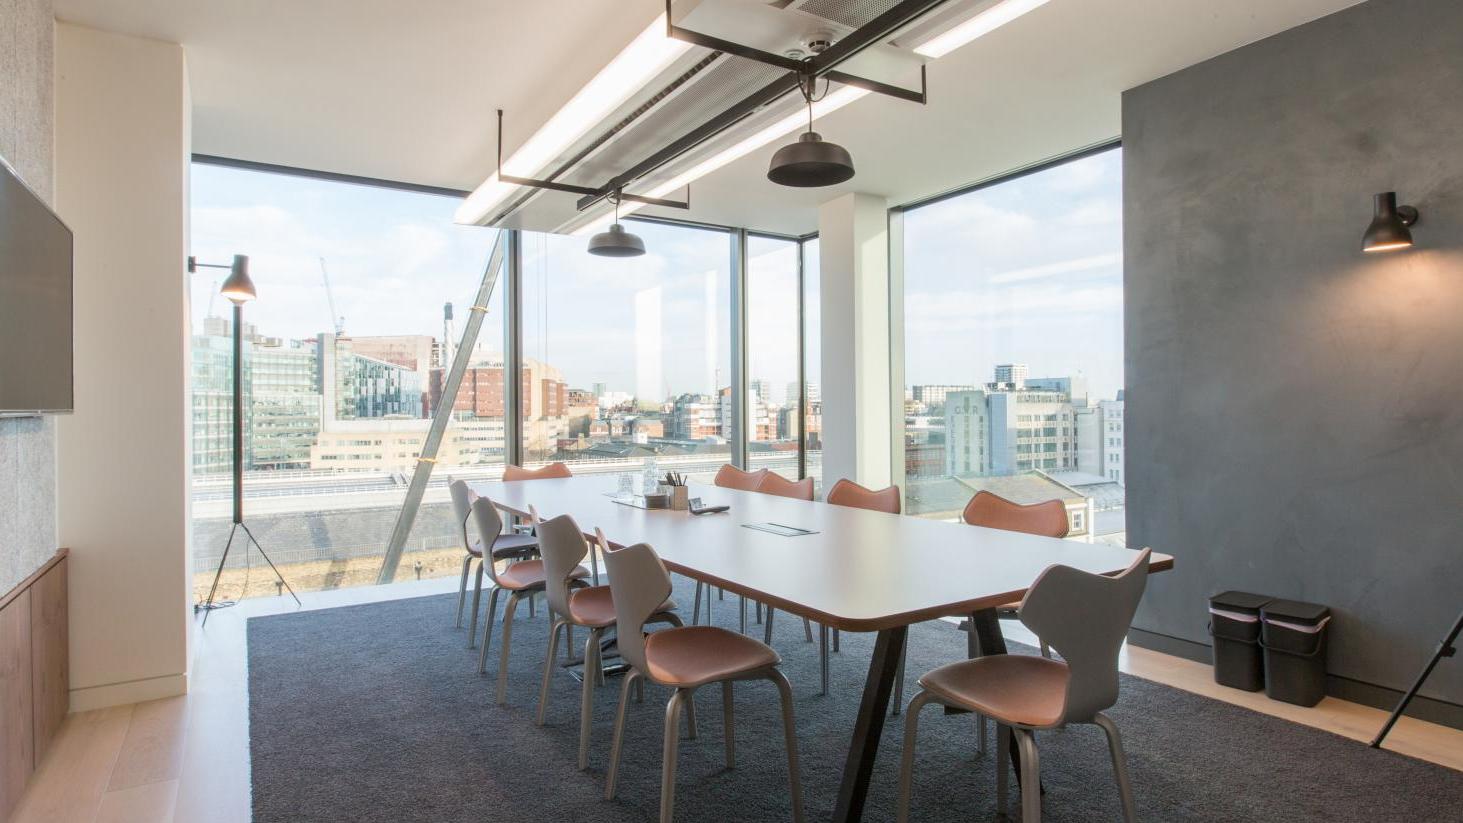 Find your Meeting Room in Paddington, London